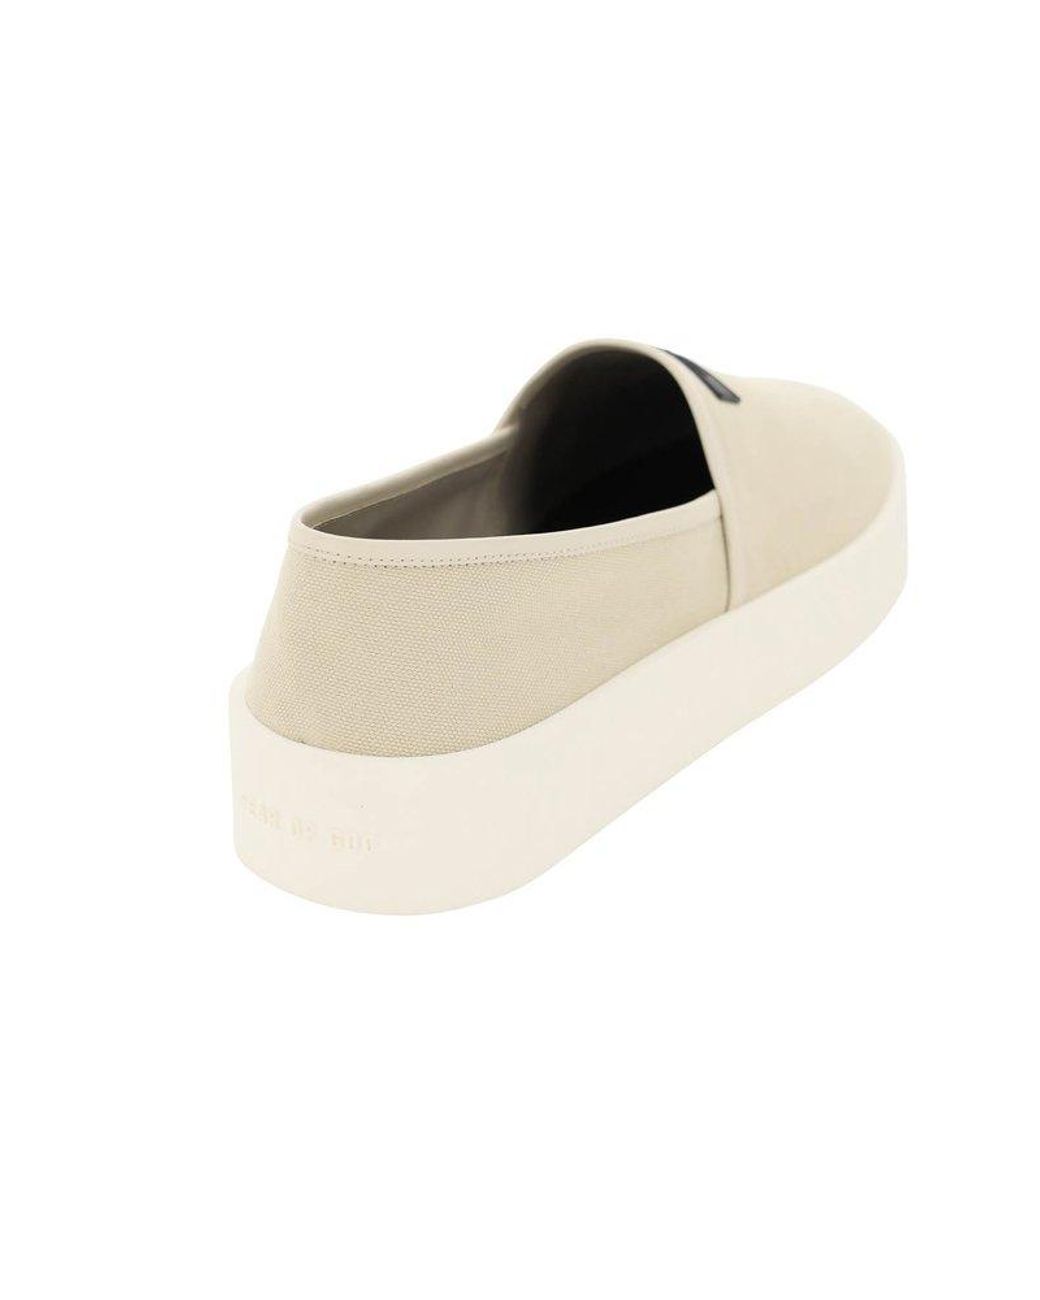 Fear Of God Canvas Espadrilles Slippers for Men - Save 62% | Lyst